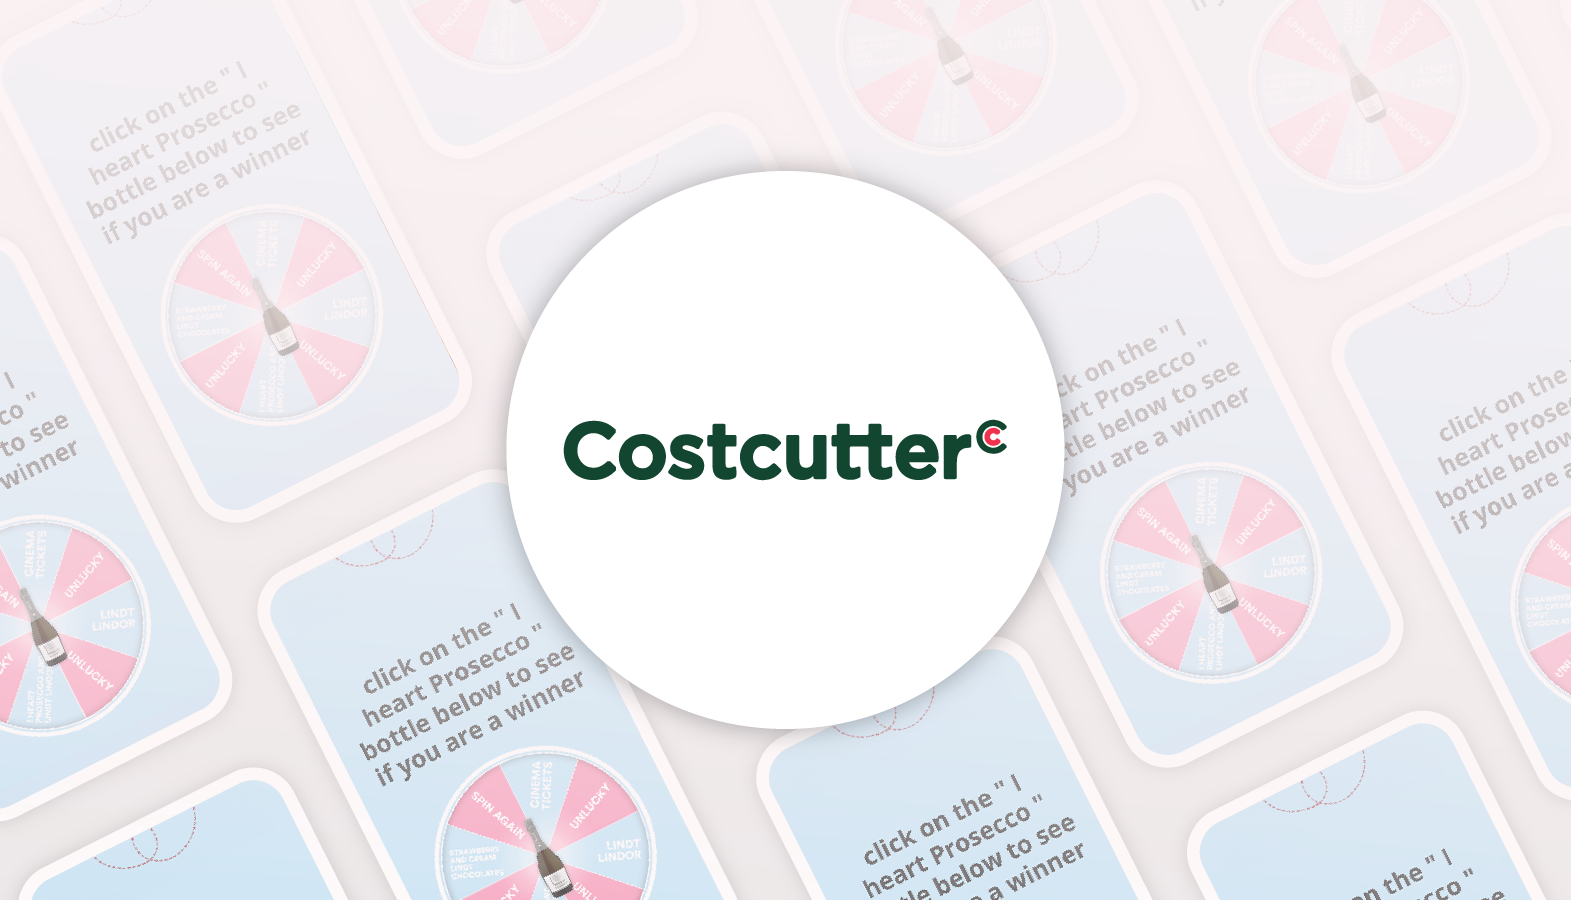 Costcutter costumer story with Playable